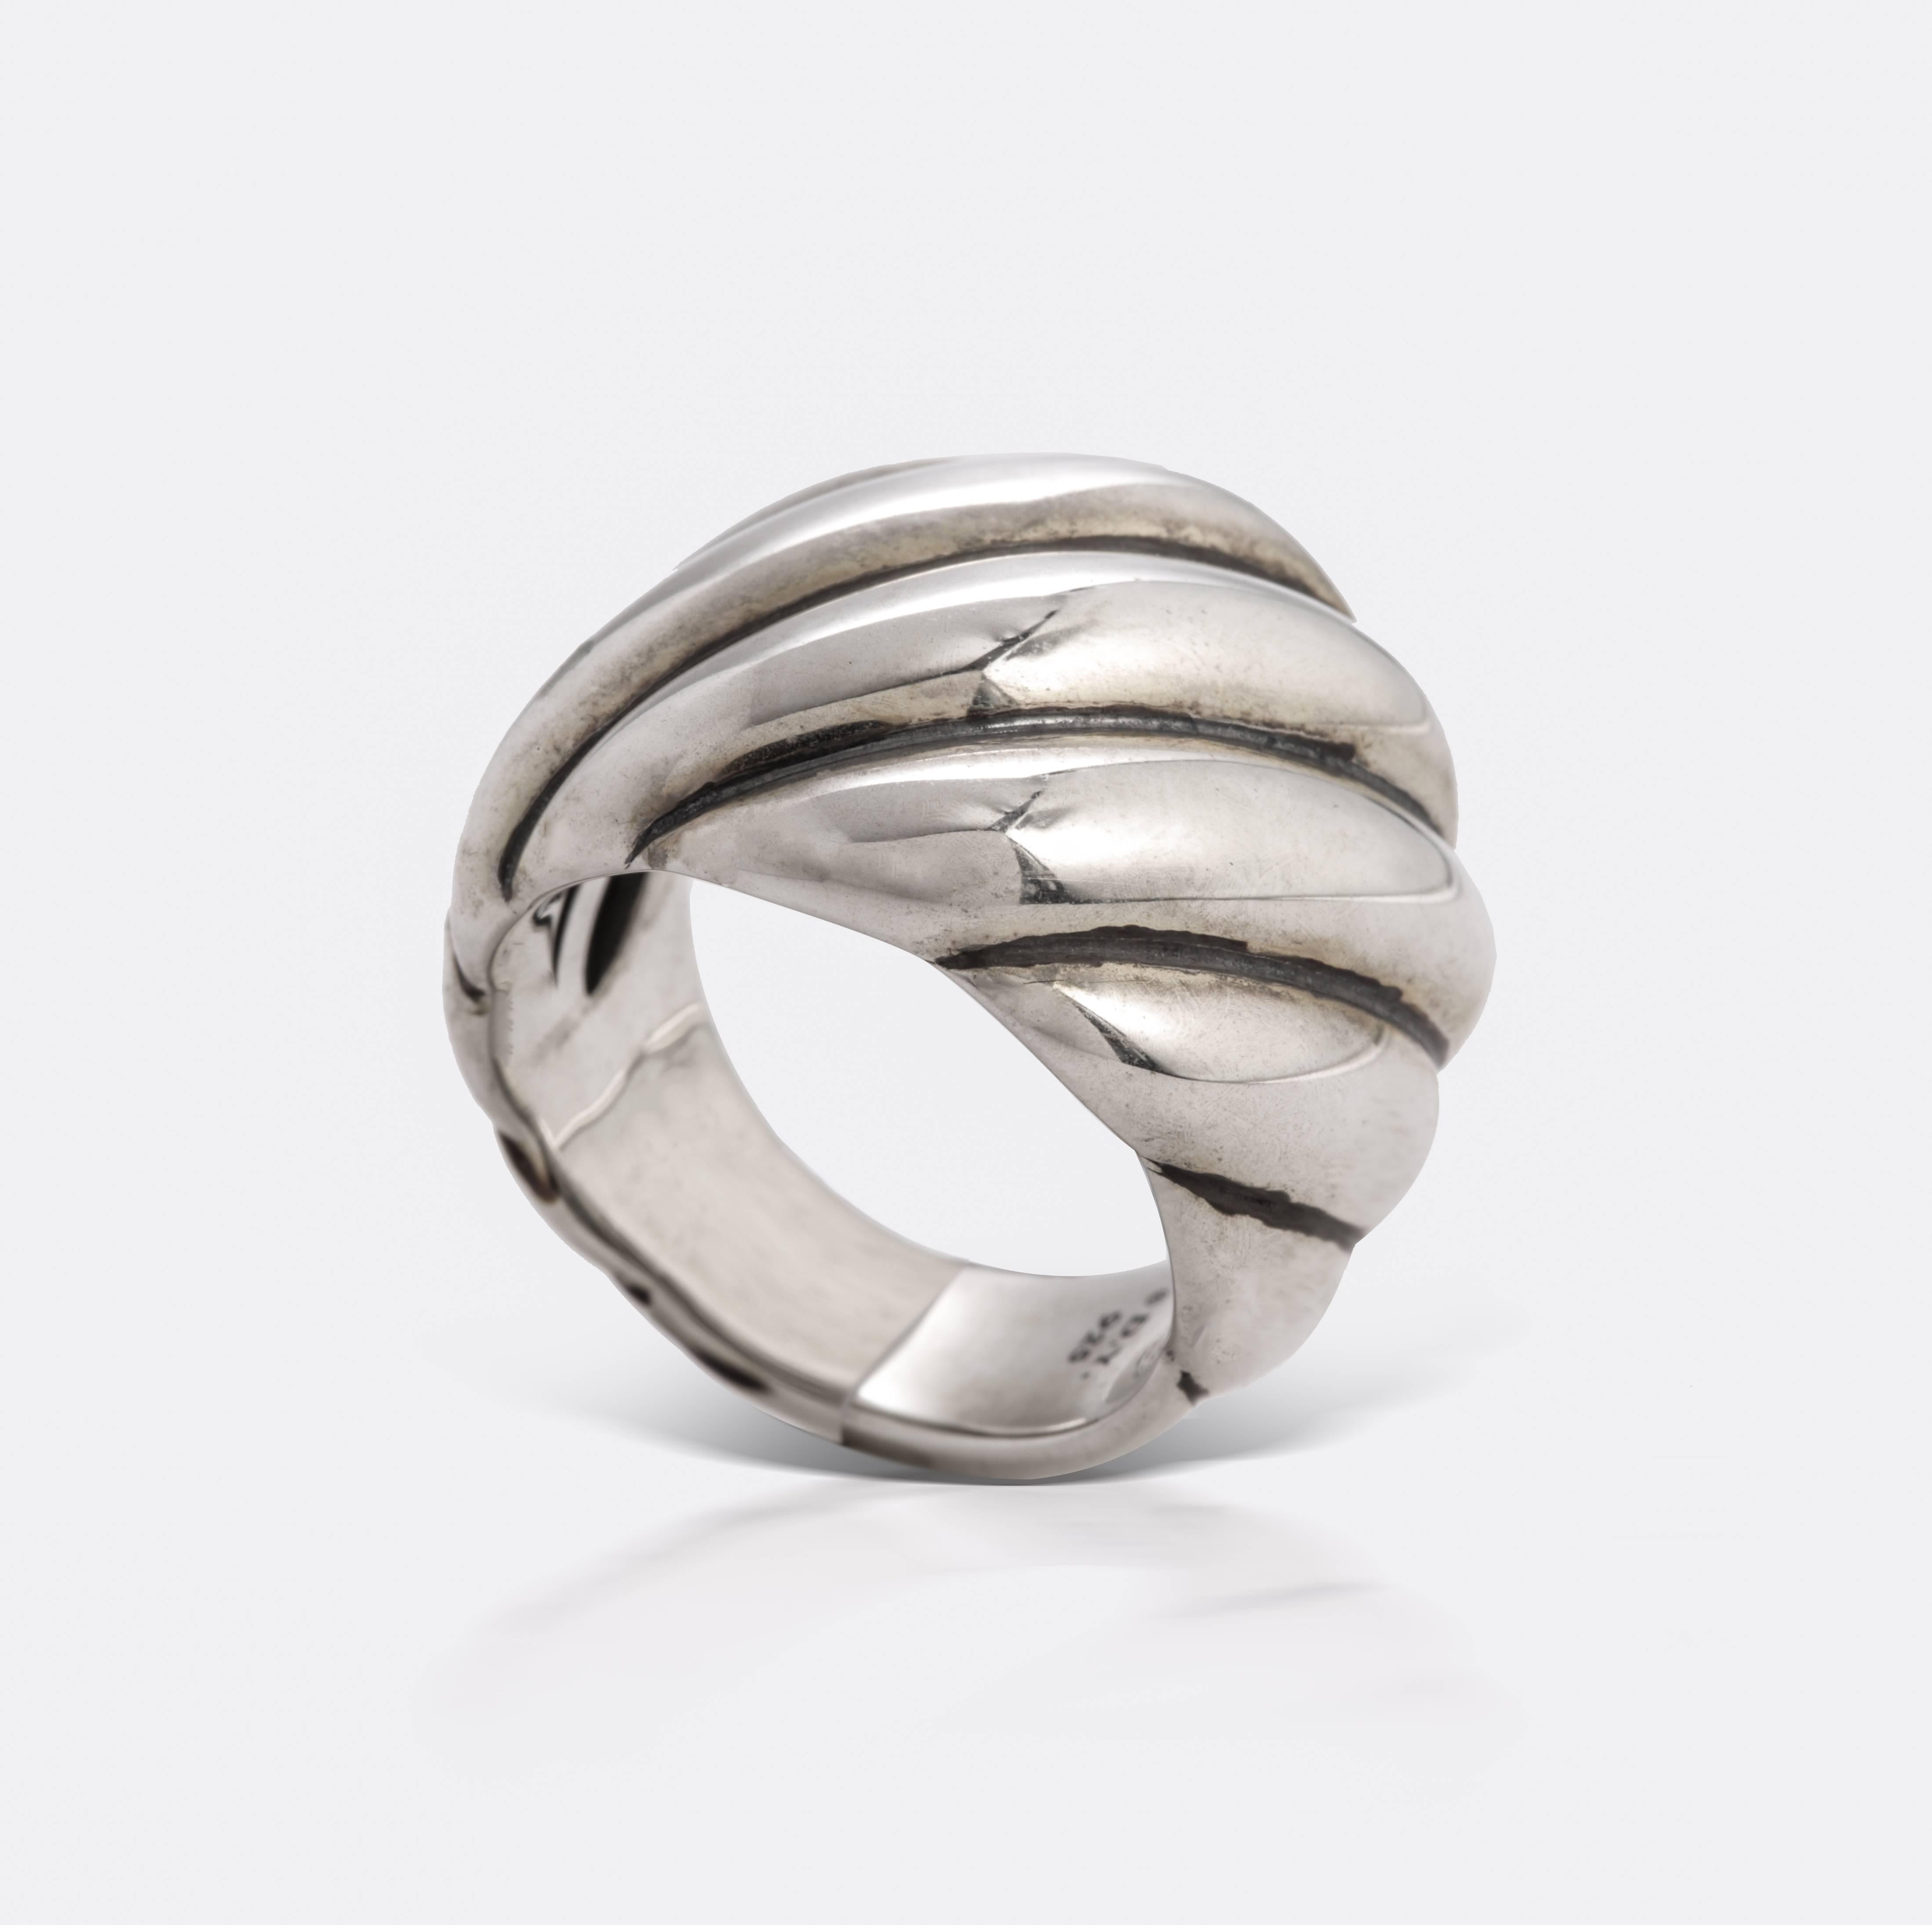 Previously loved sterling silver David Yurman Sculpted Cable ring featuring grooved details throughout with tapered shank (size 7).
